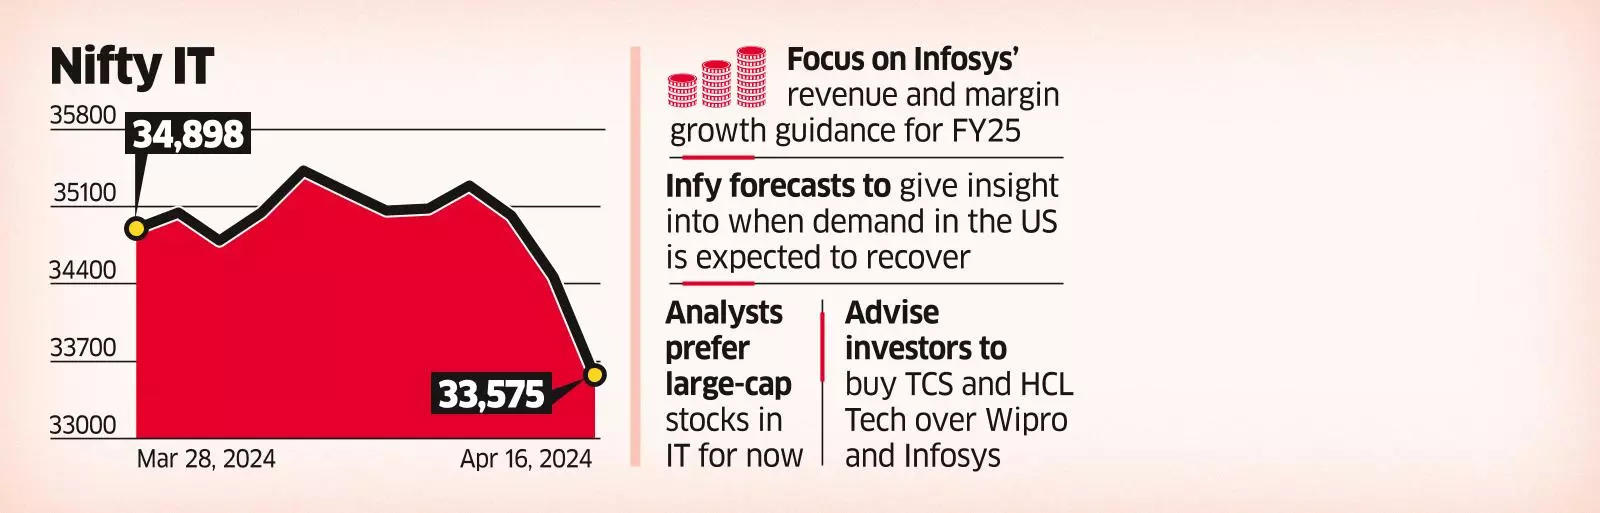 IT stocks slump as F&O bears mount bets on more downside fears, Infy results in focus 